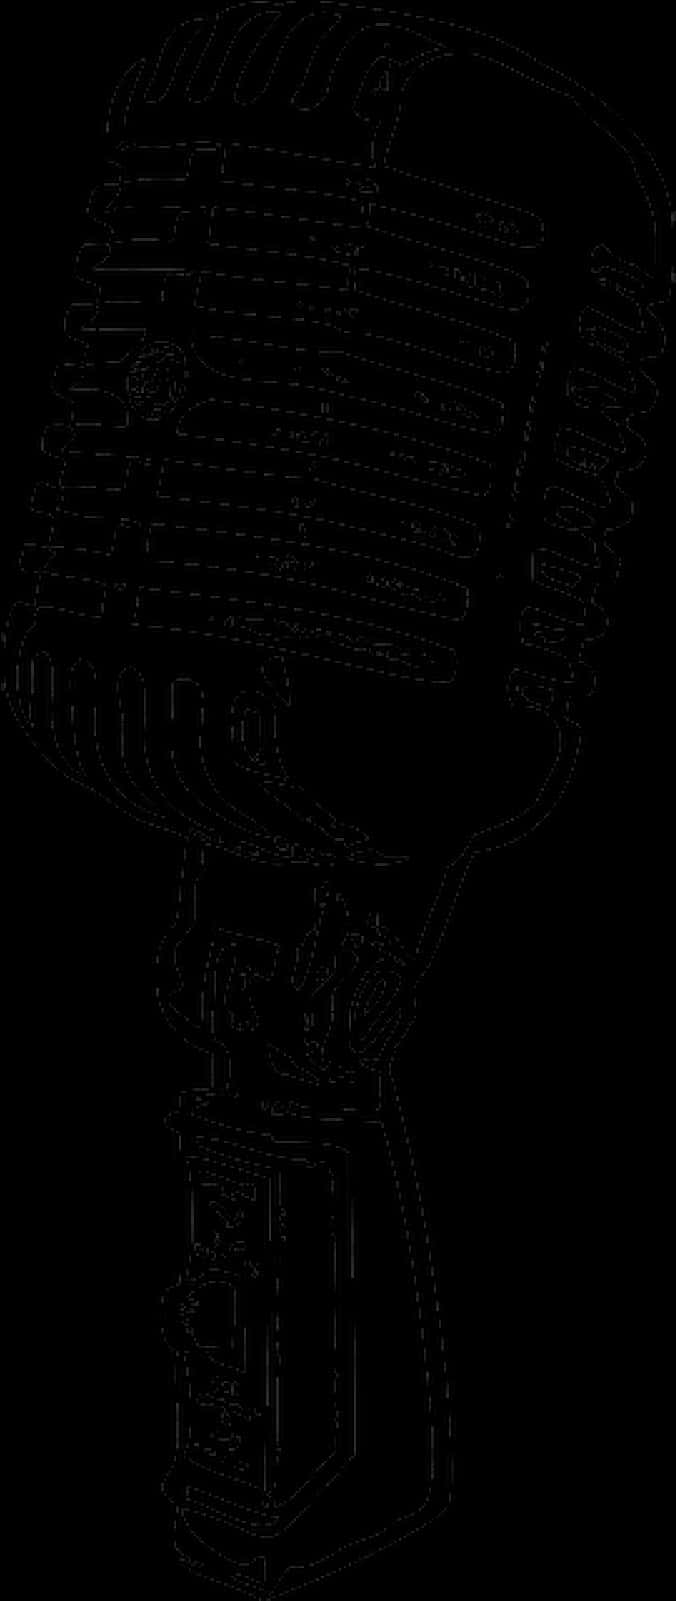 Vintage Microphone Silhouette PNG